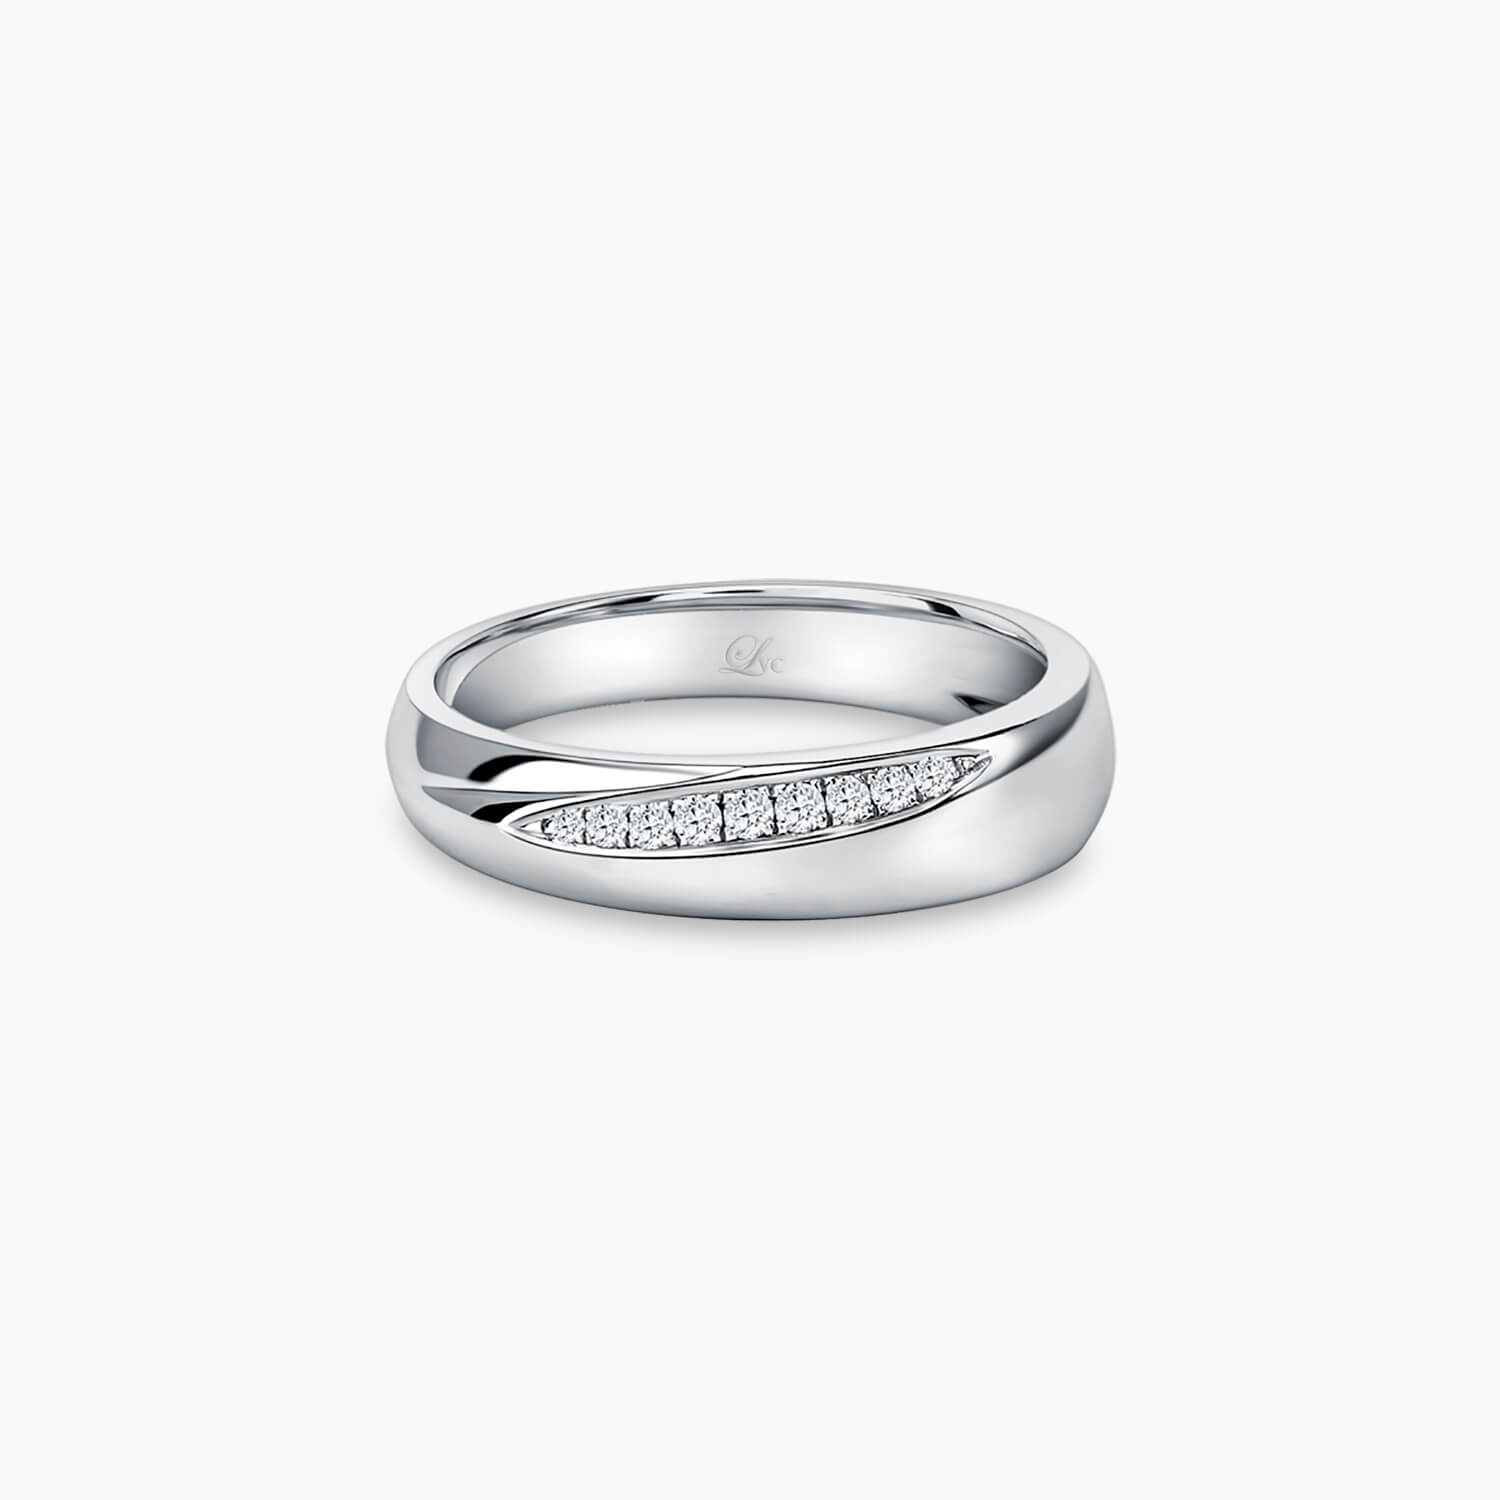 LVC PURETE TRUST WEDDING BAND IN PLATINUM WITH DIAMONDS INLAY a wedding band for women in platinum with approximately 9 diamonds 钻石 戒指 cincin diamond